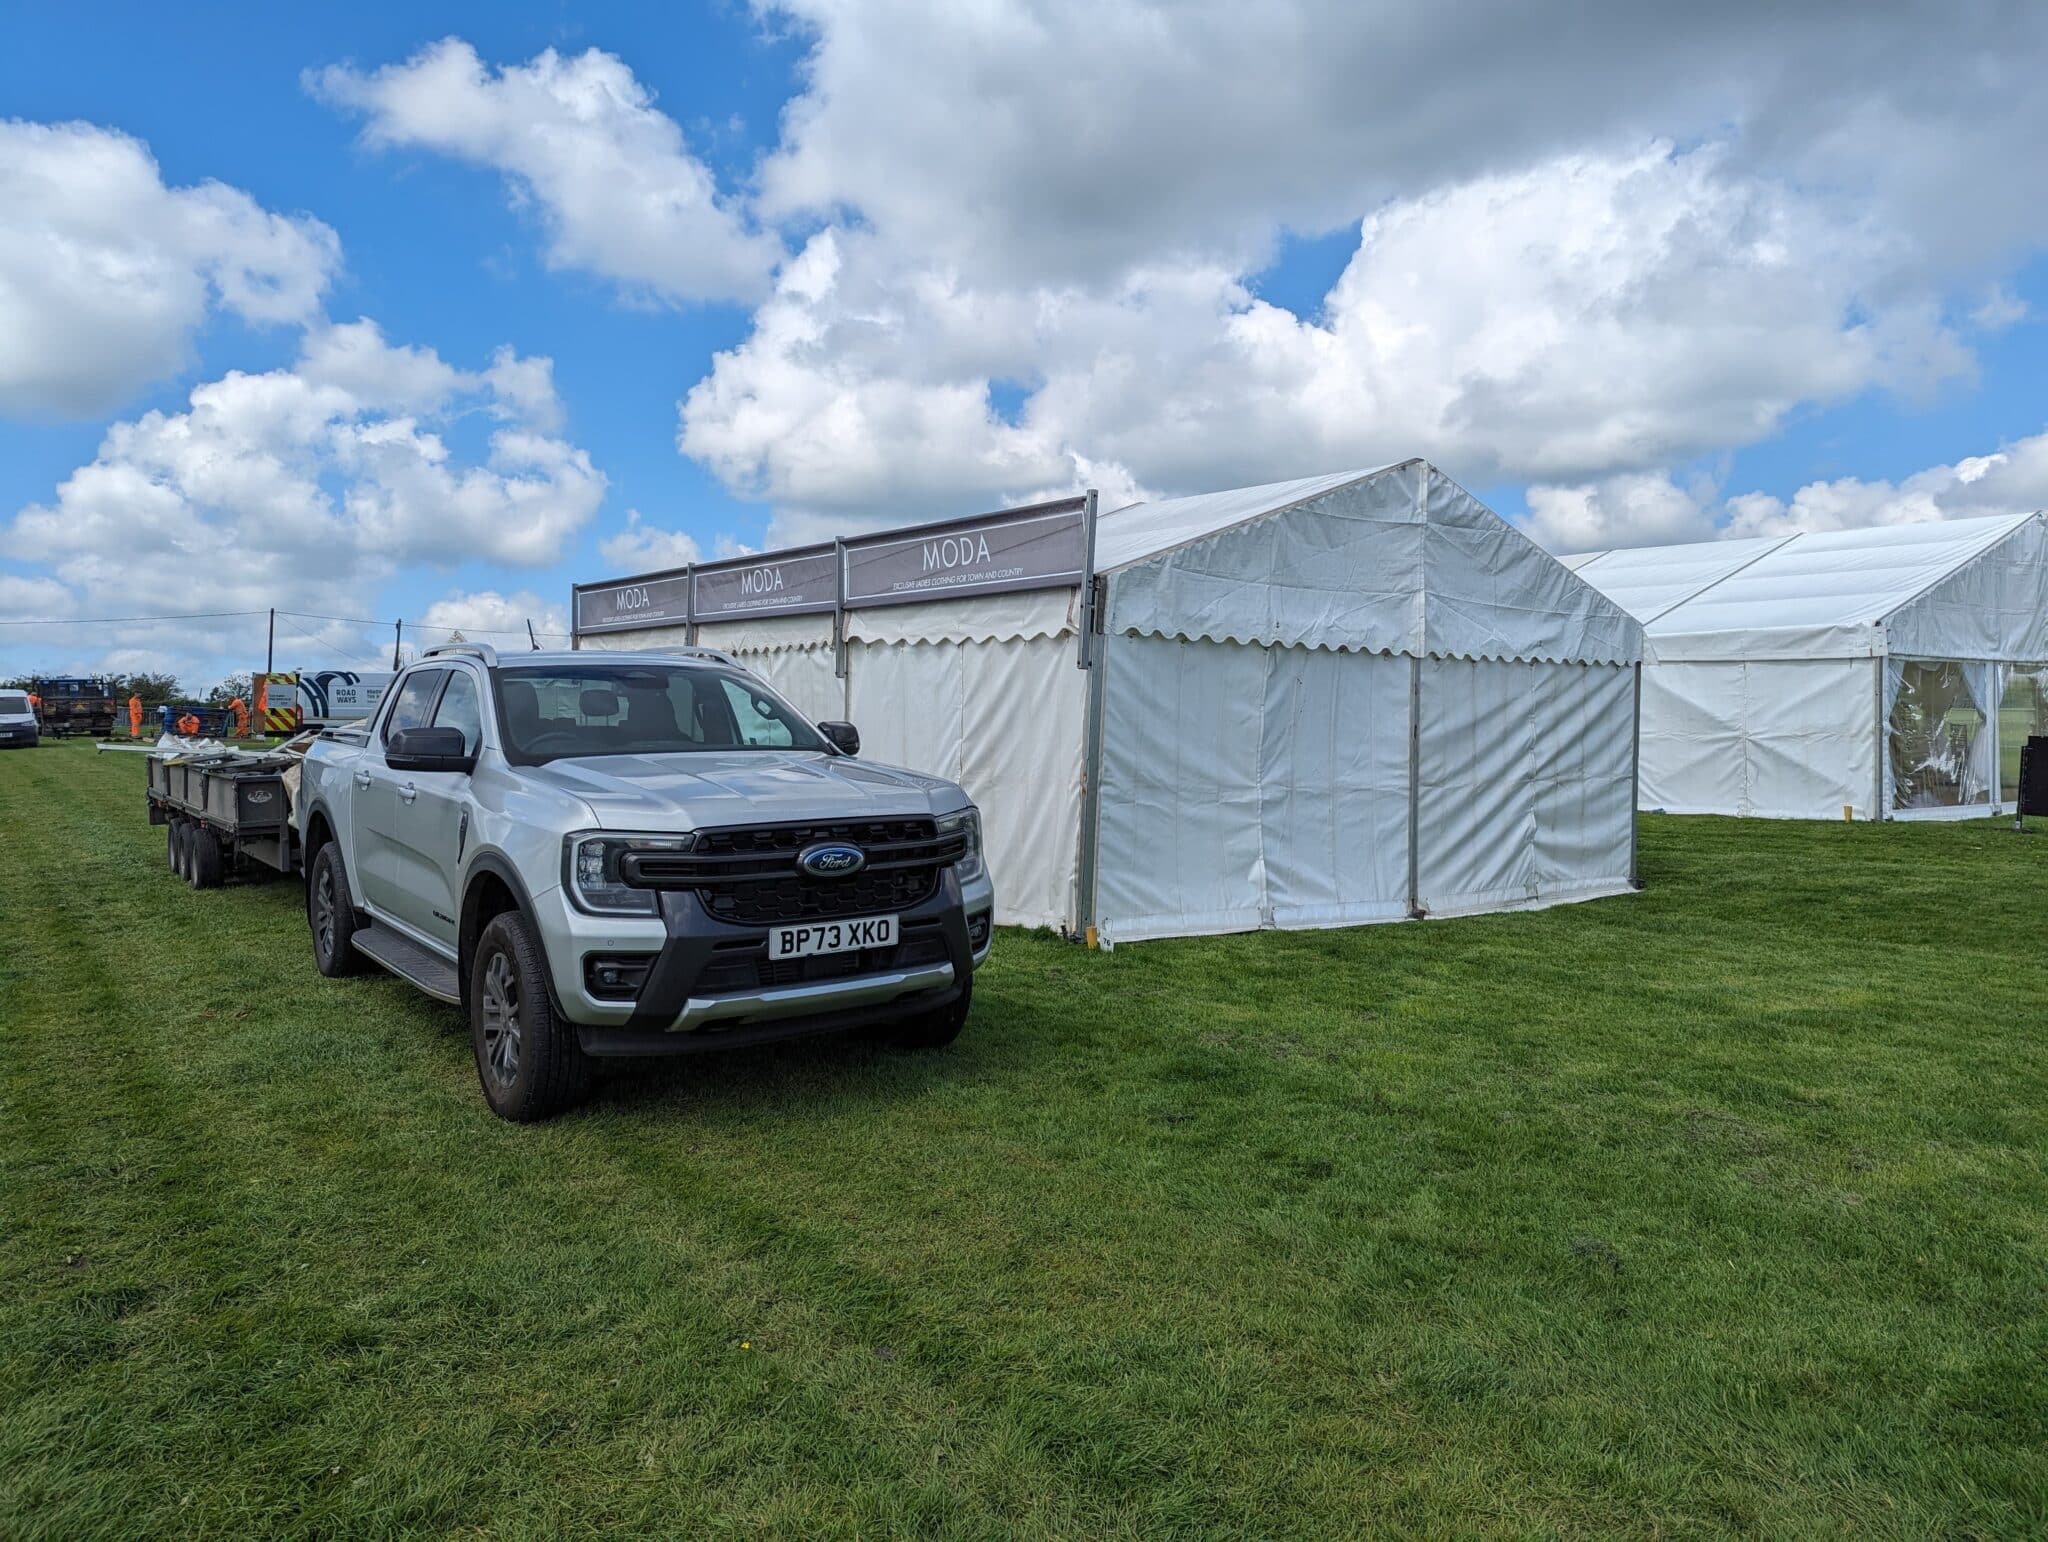 Heathfield Agricultural Show with Premier Marquee Installations for Moda Clothing and Jagga & Sons Ltd